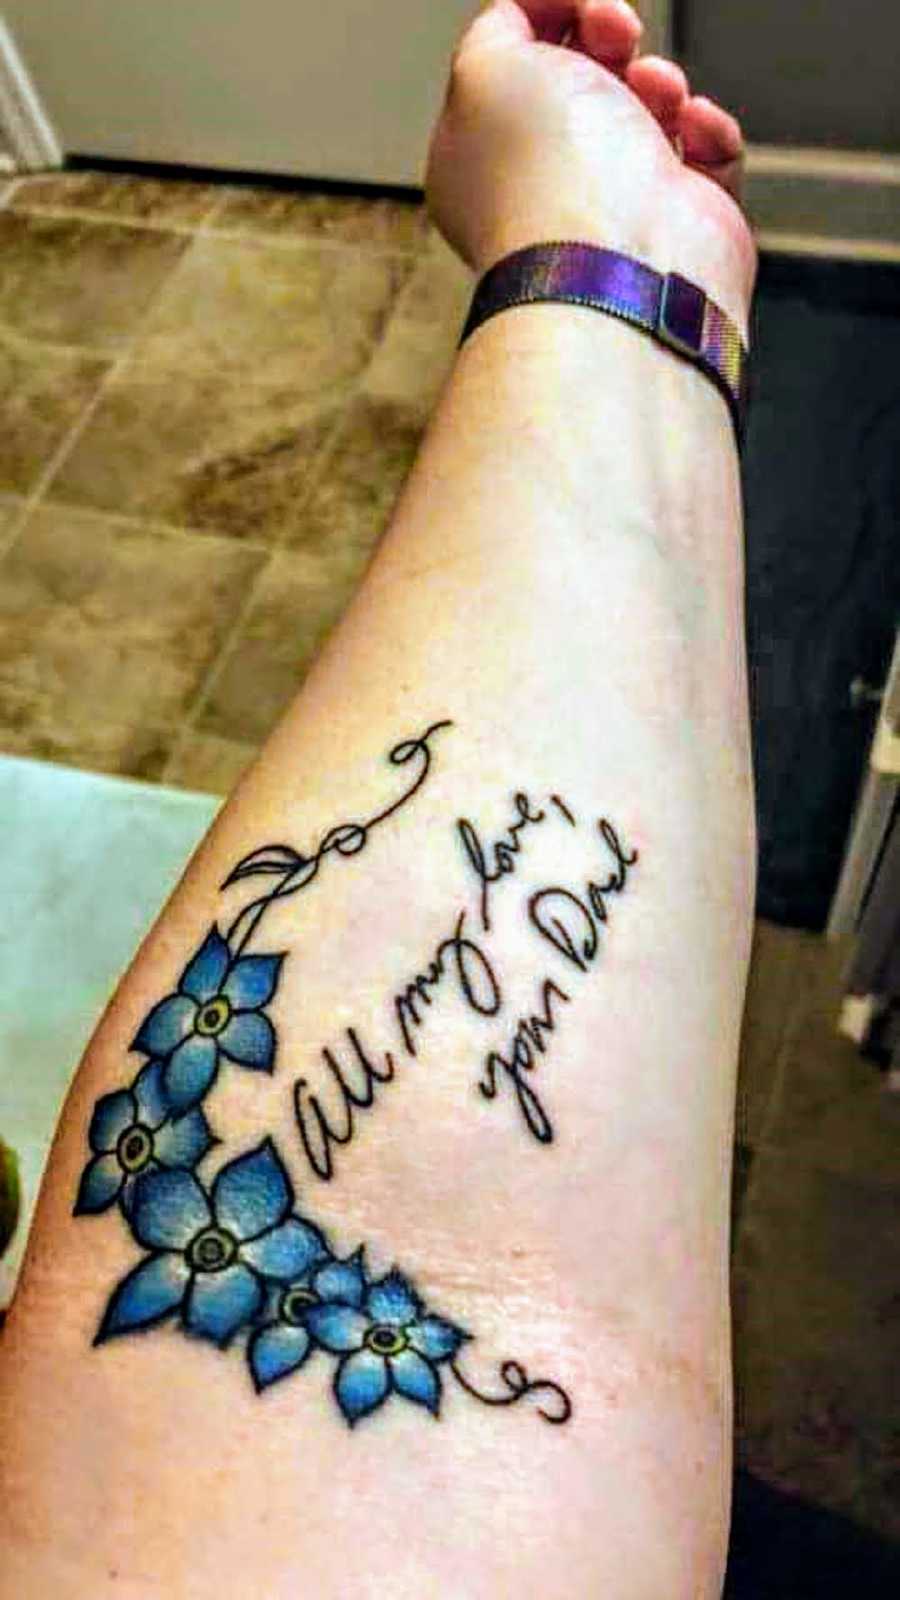 Woman's forearm that has tattoo of her deceased father's writing 